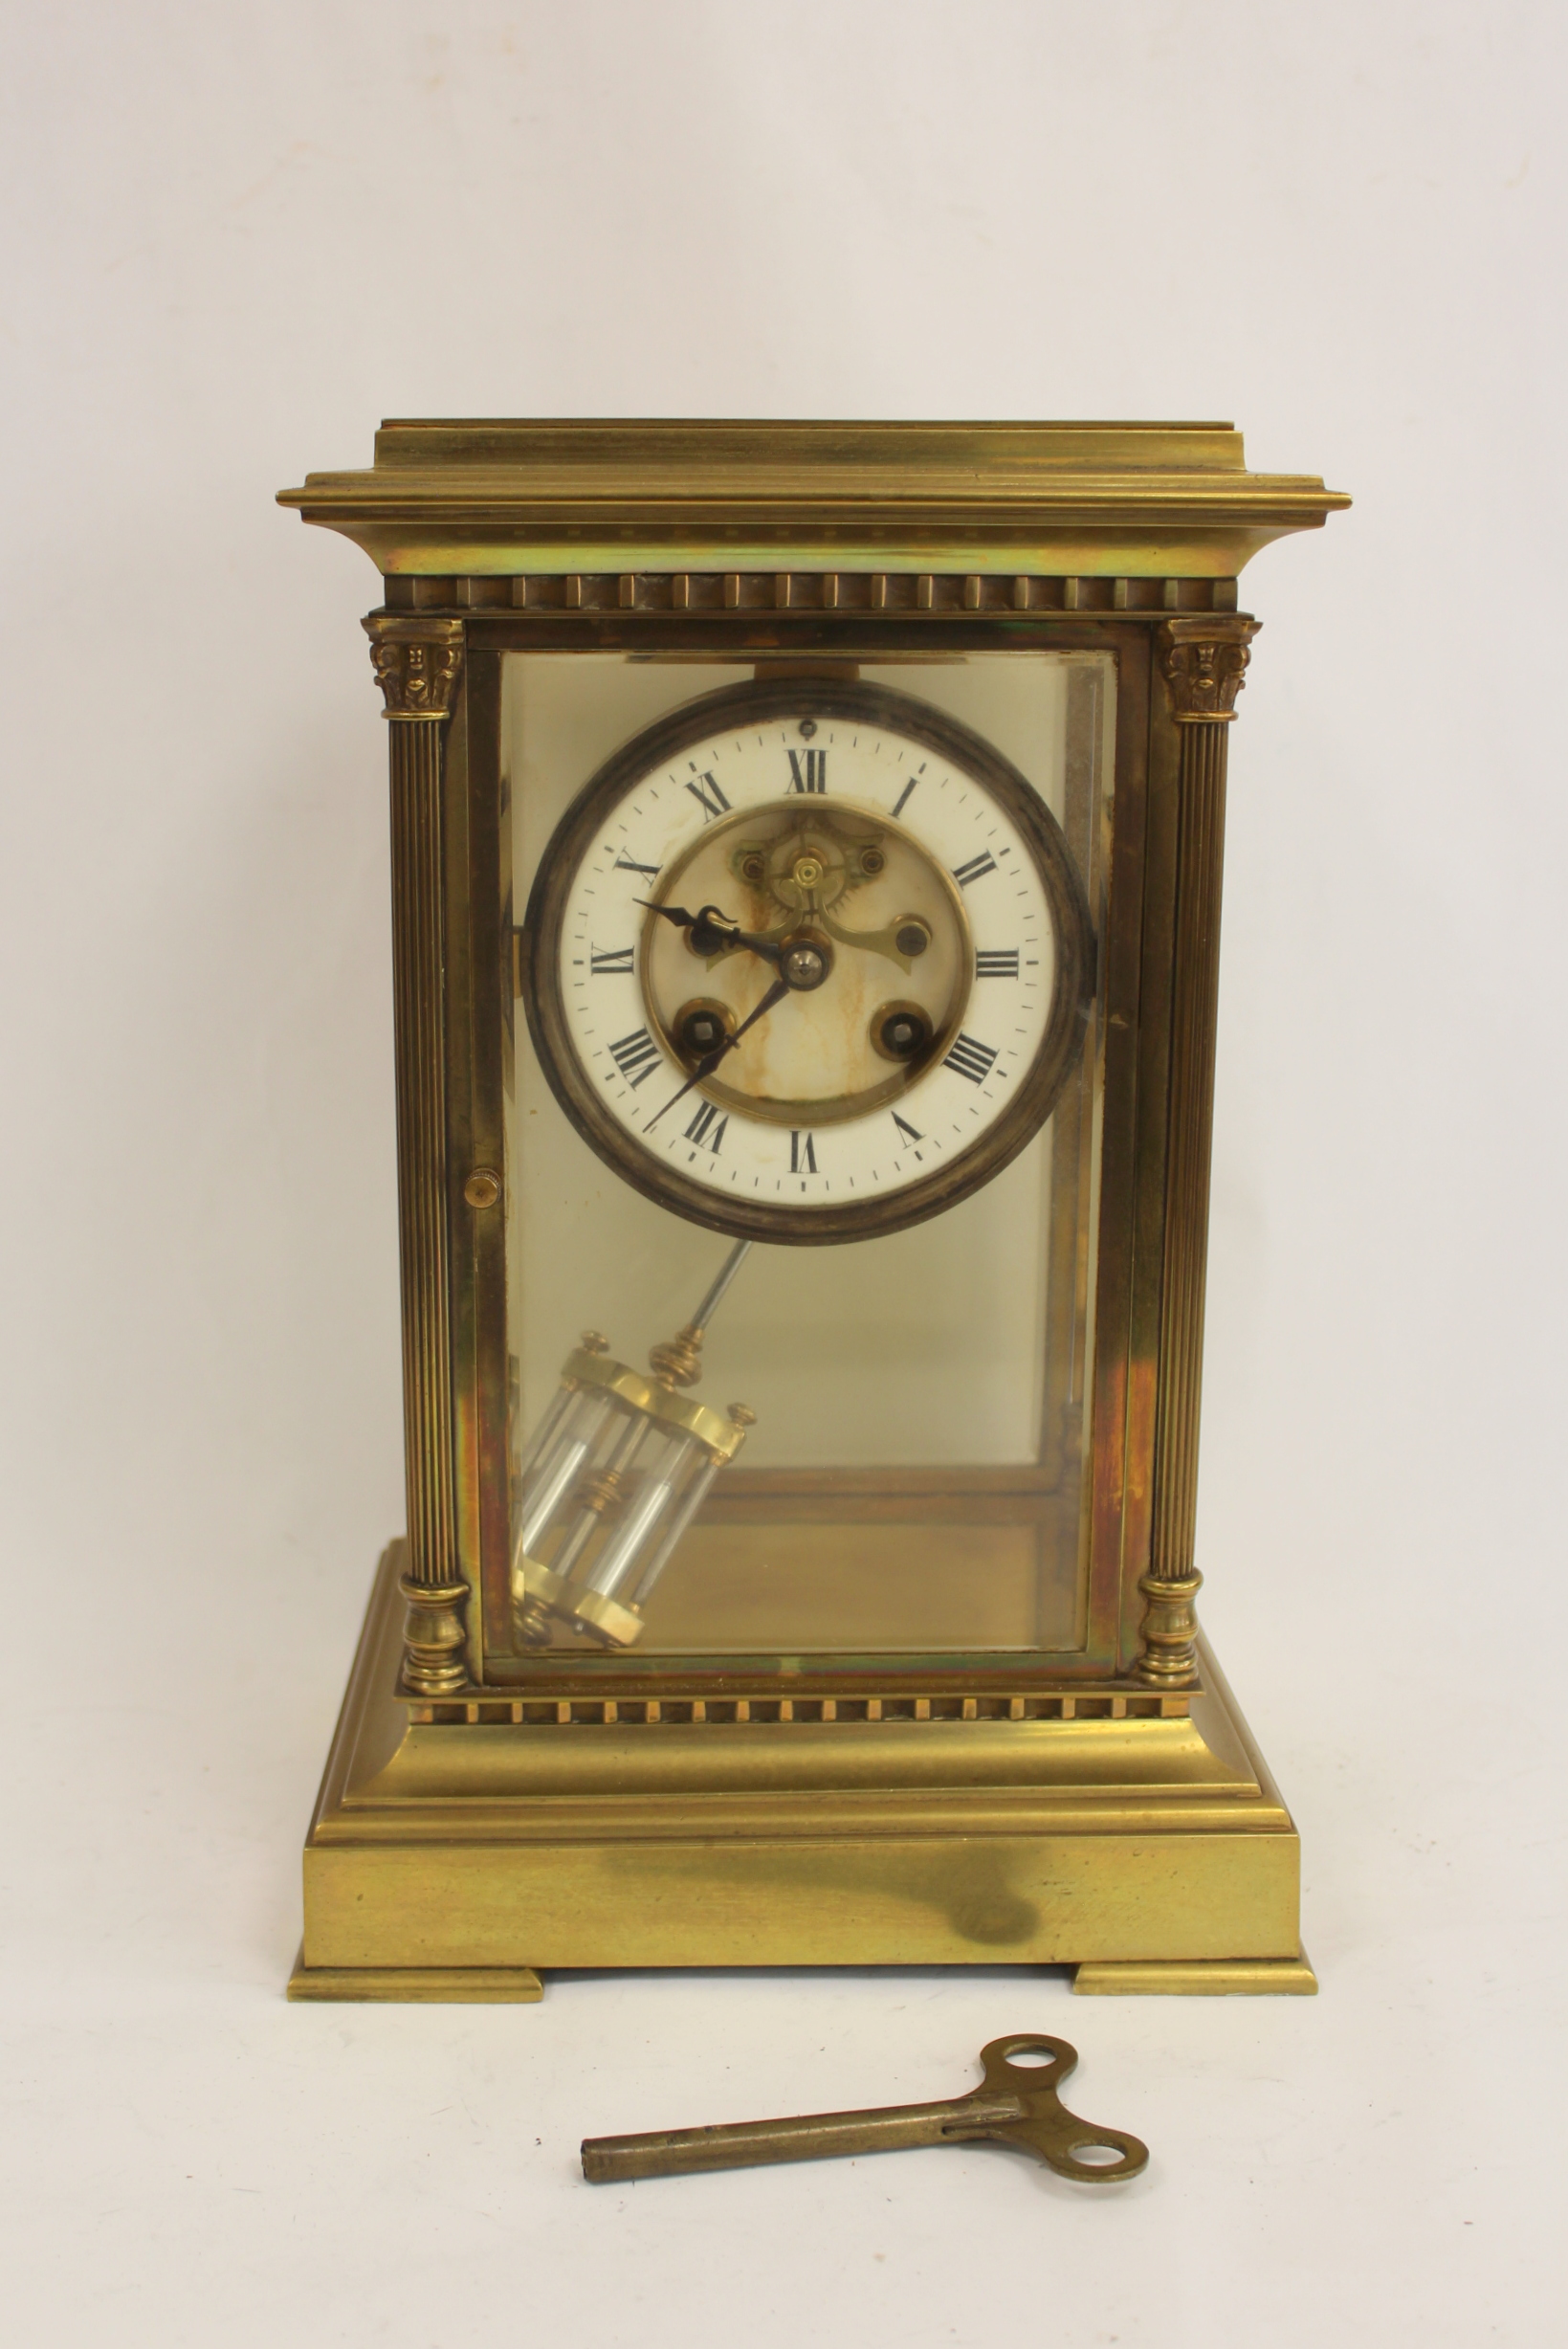 French mantel clock of 'four glass' style with visible escapement, 'mercury' pendulum and fluted